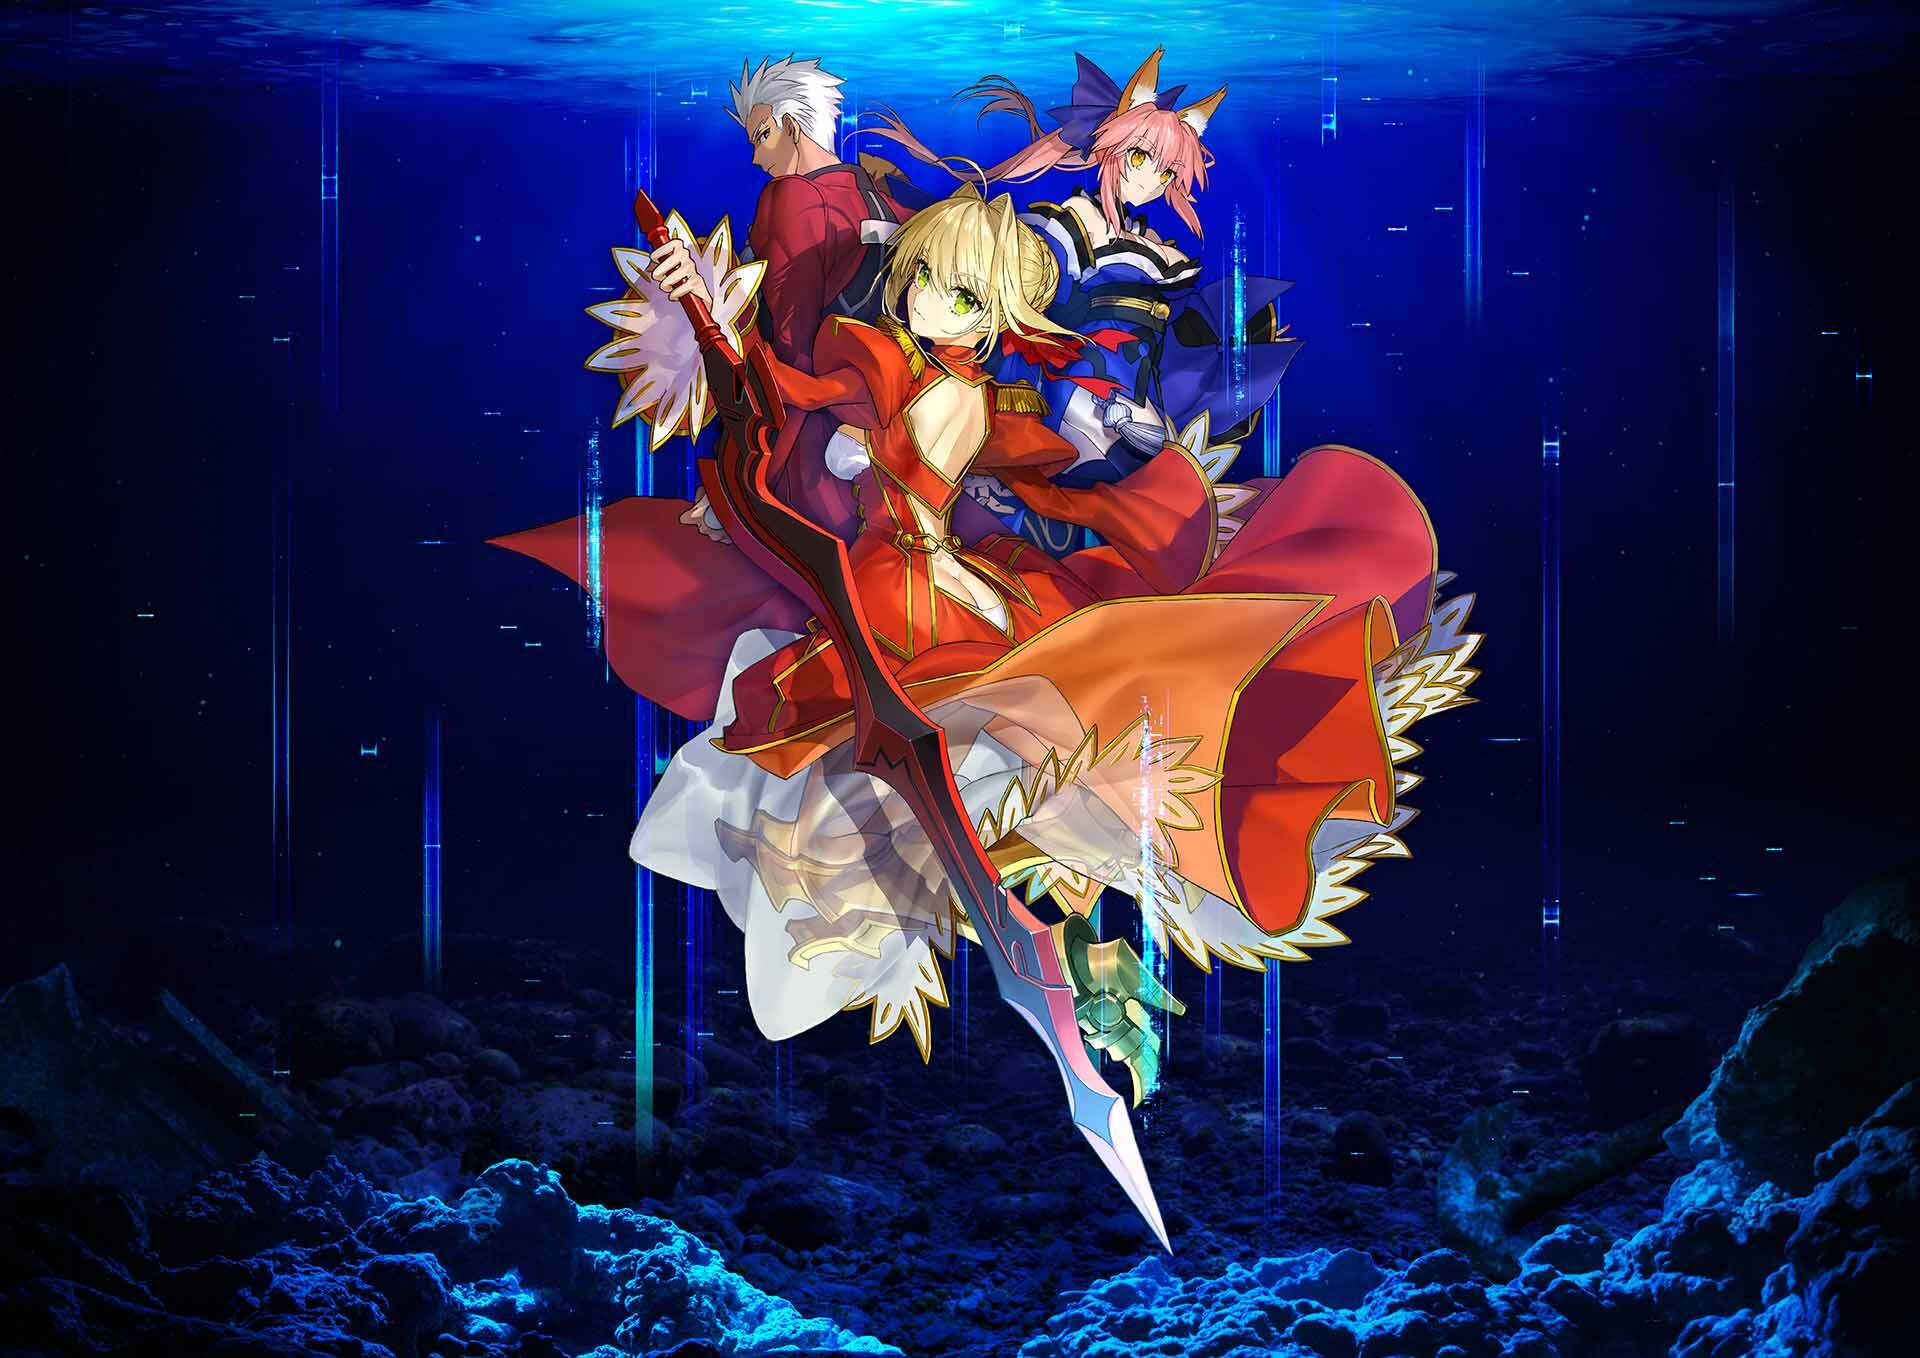 Fate/EXTRA Record」開発始動 - アキバ総研